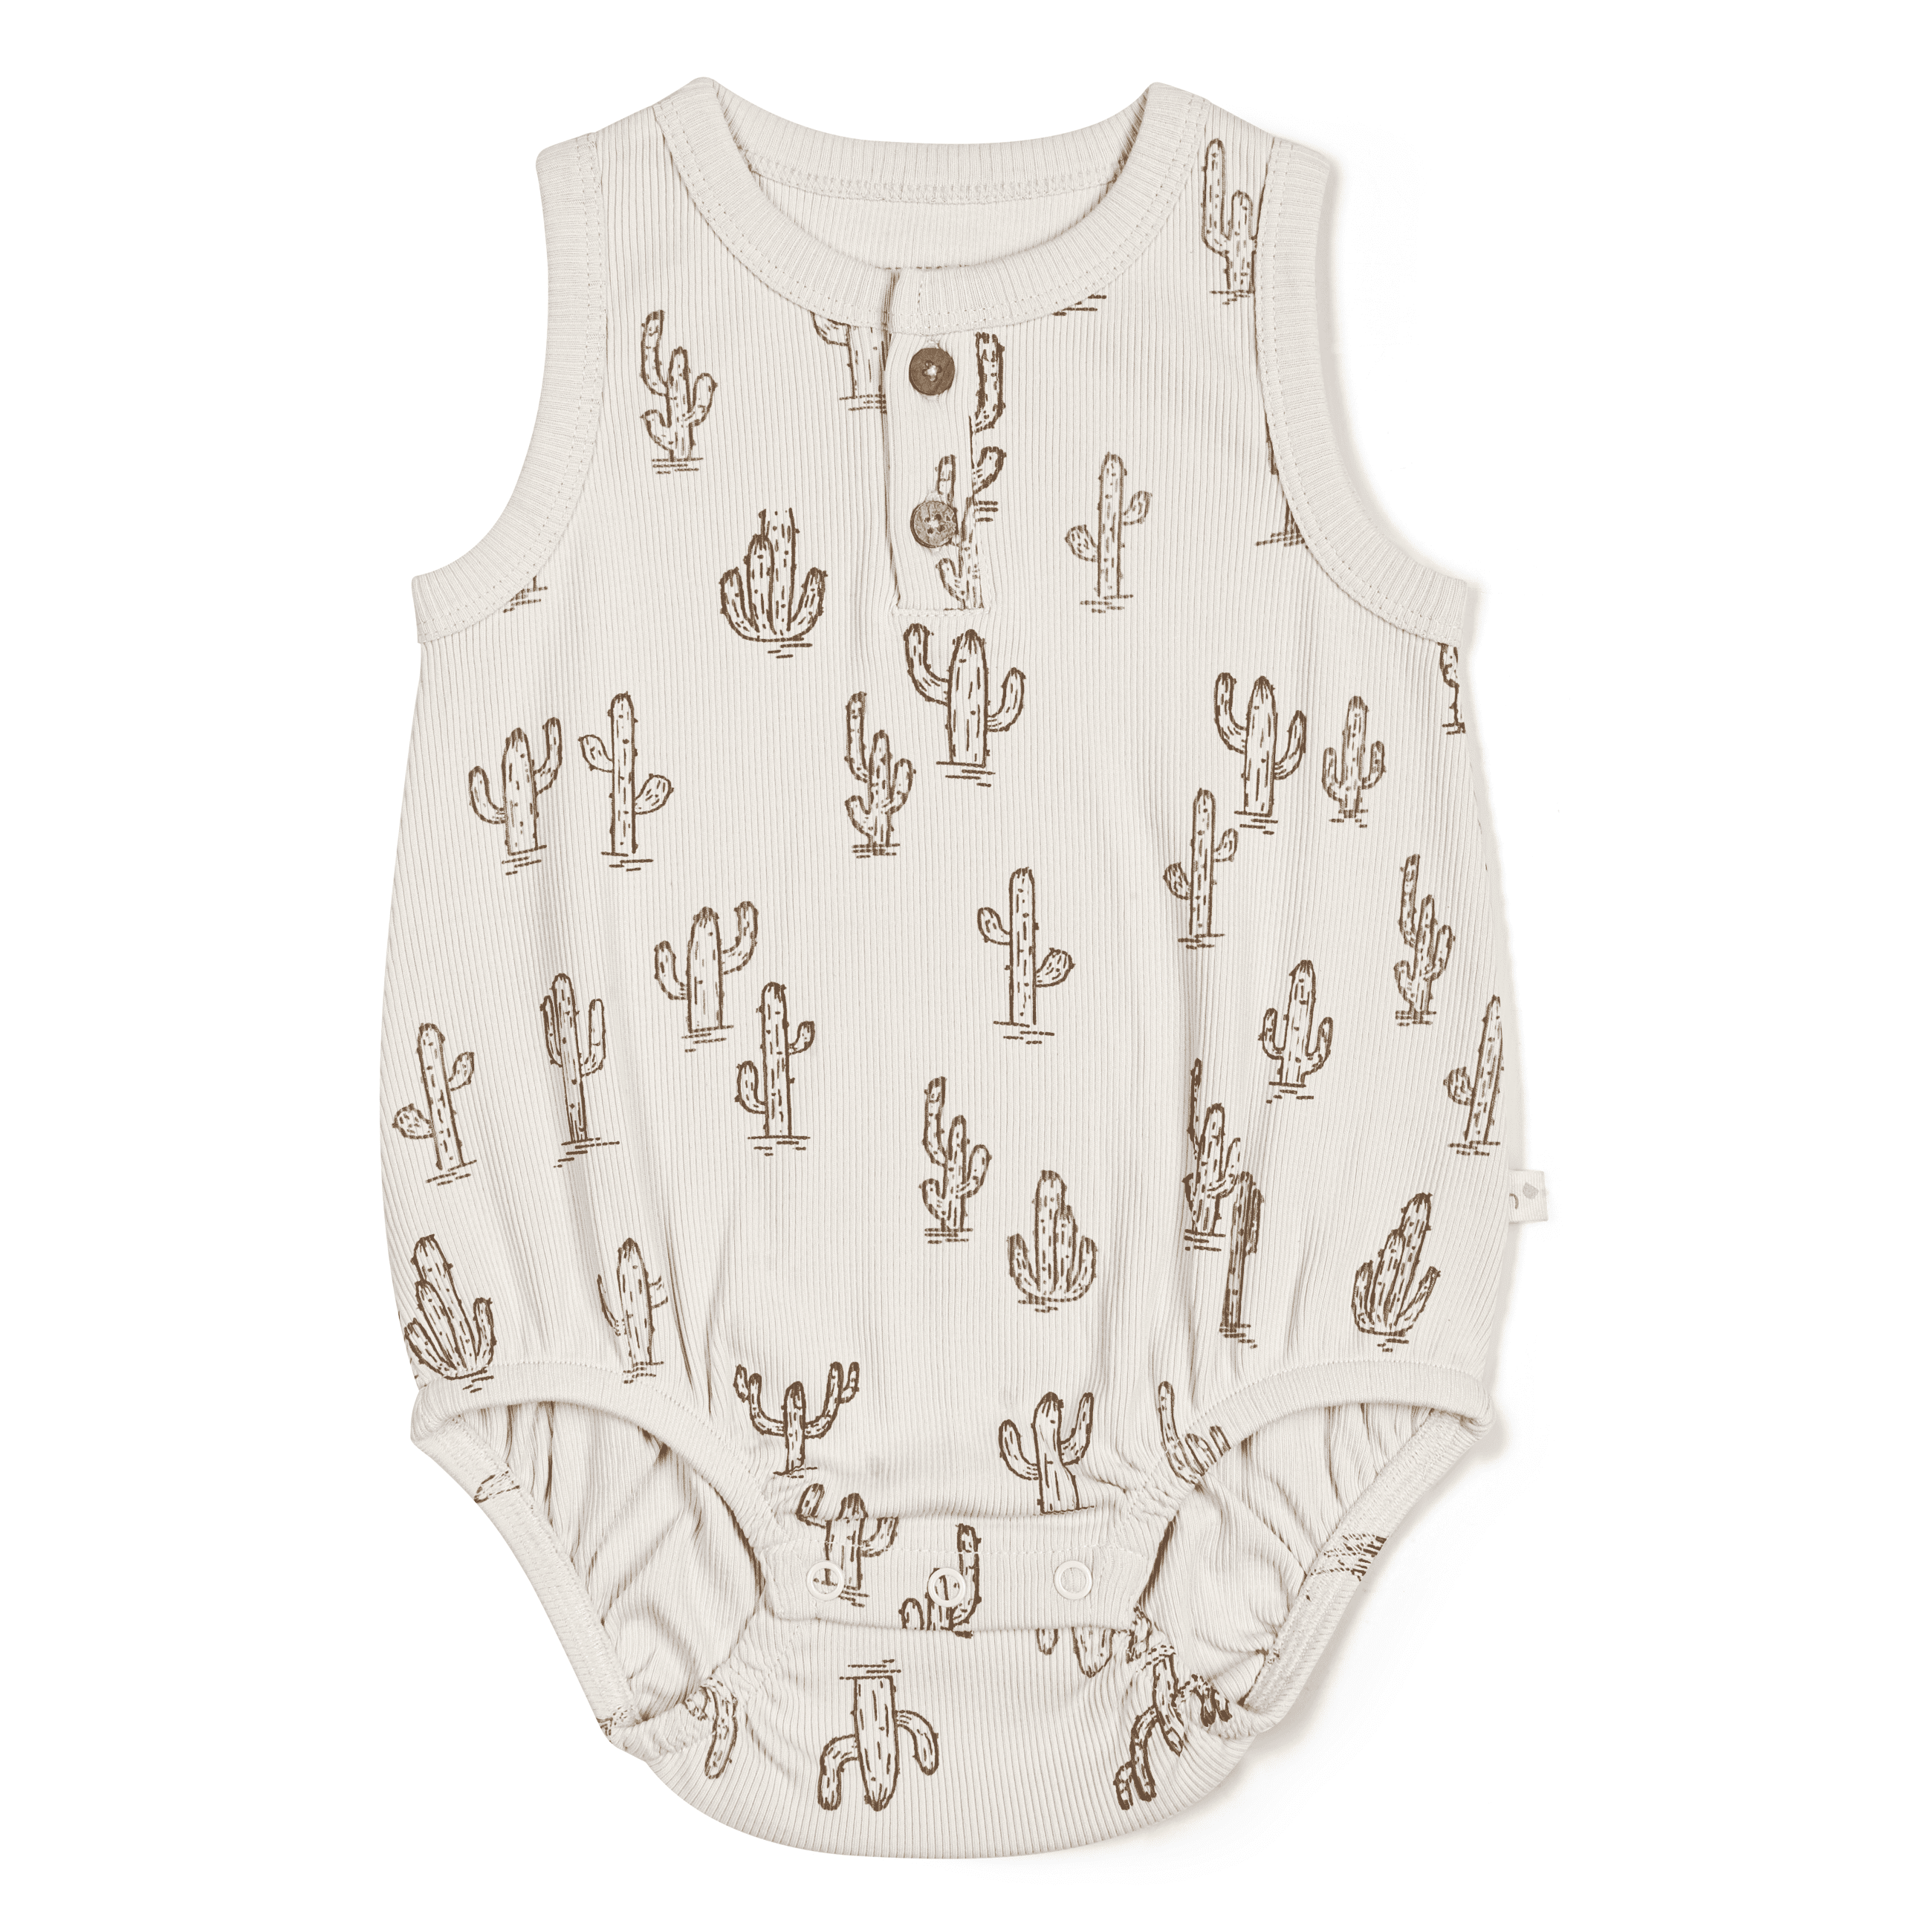 A beige toddler Organic Bubble Onesie - Cactus with a sleeveless design, decorated with a pattern of black cactus drawings. It features snap buttons at the neckline and leg openings by Makemake Organics.